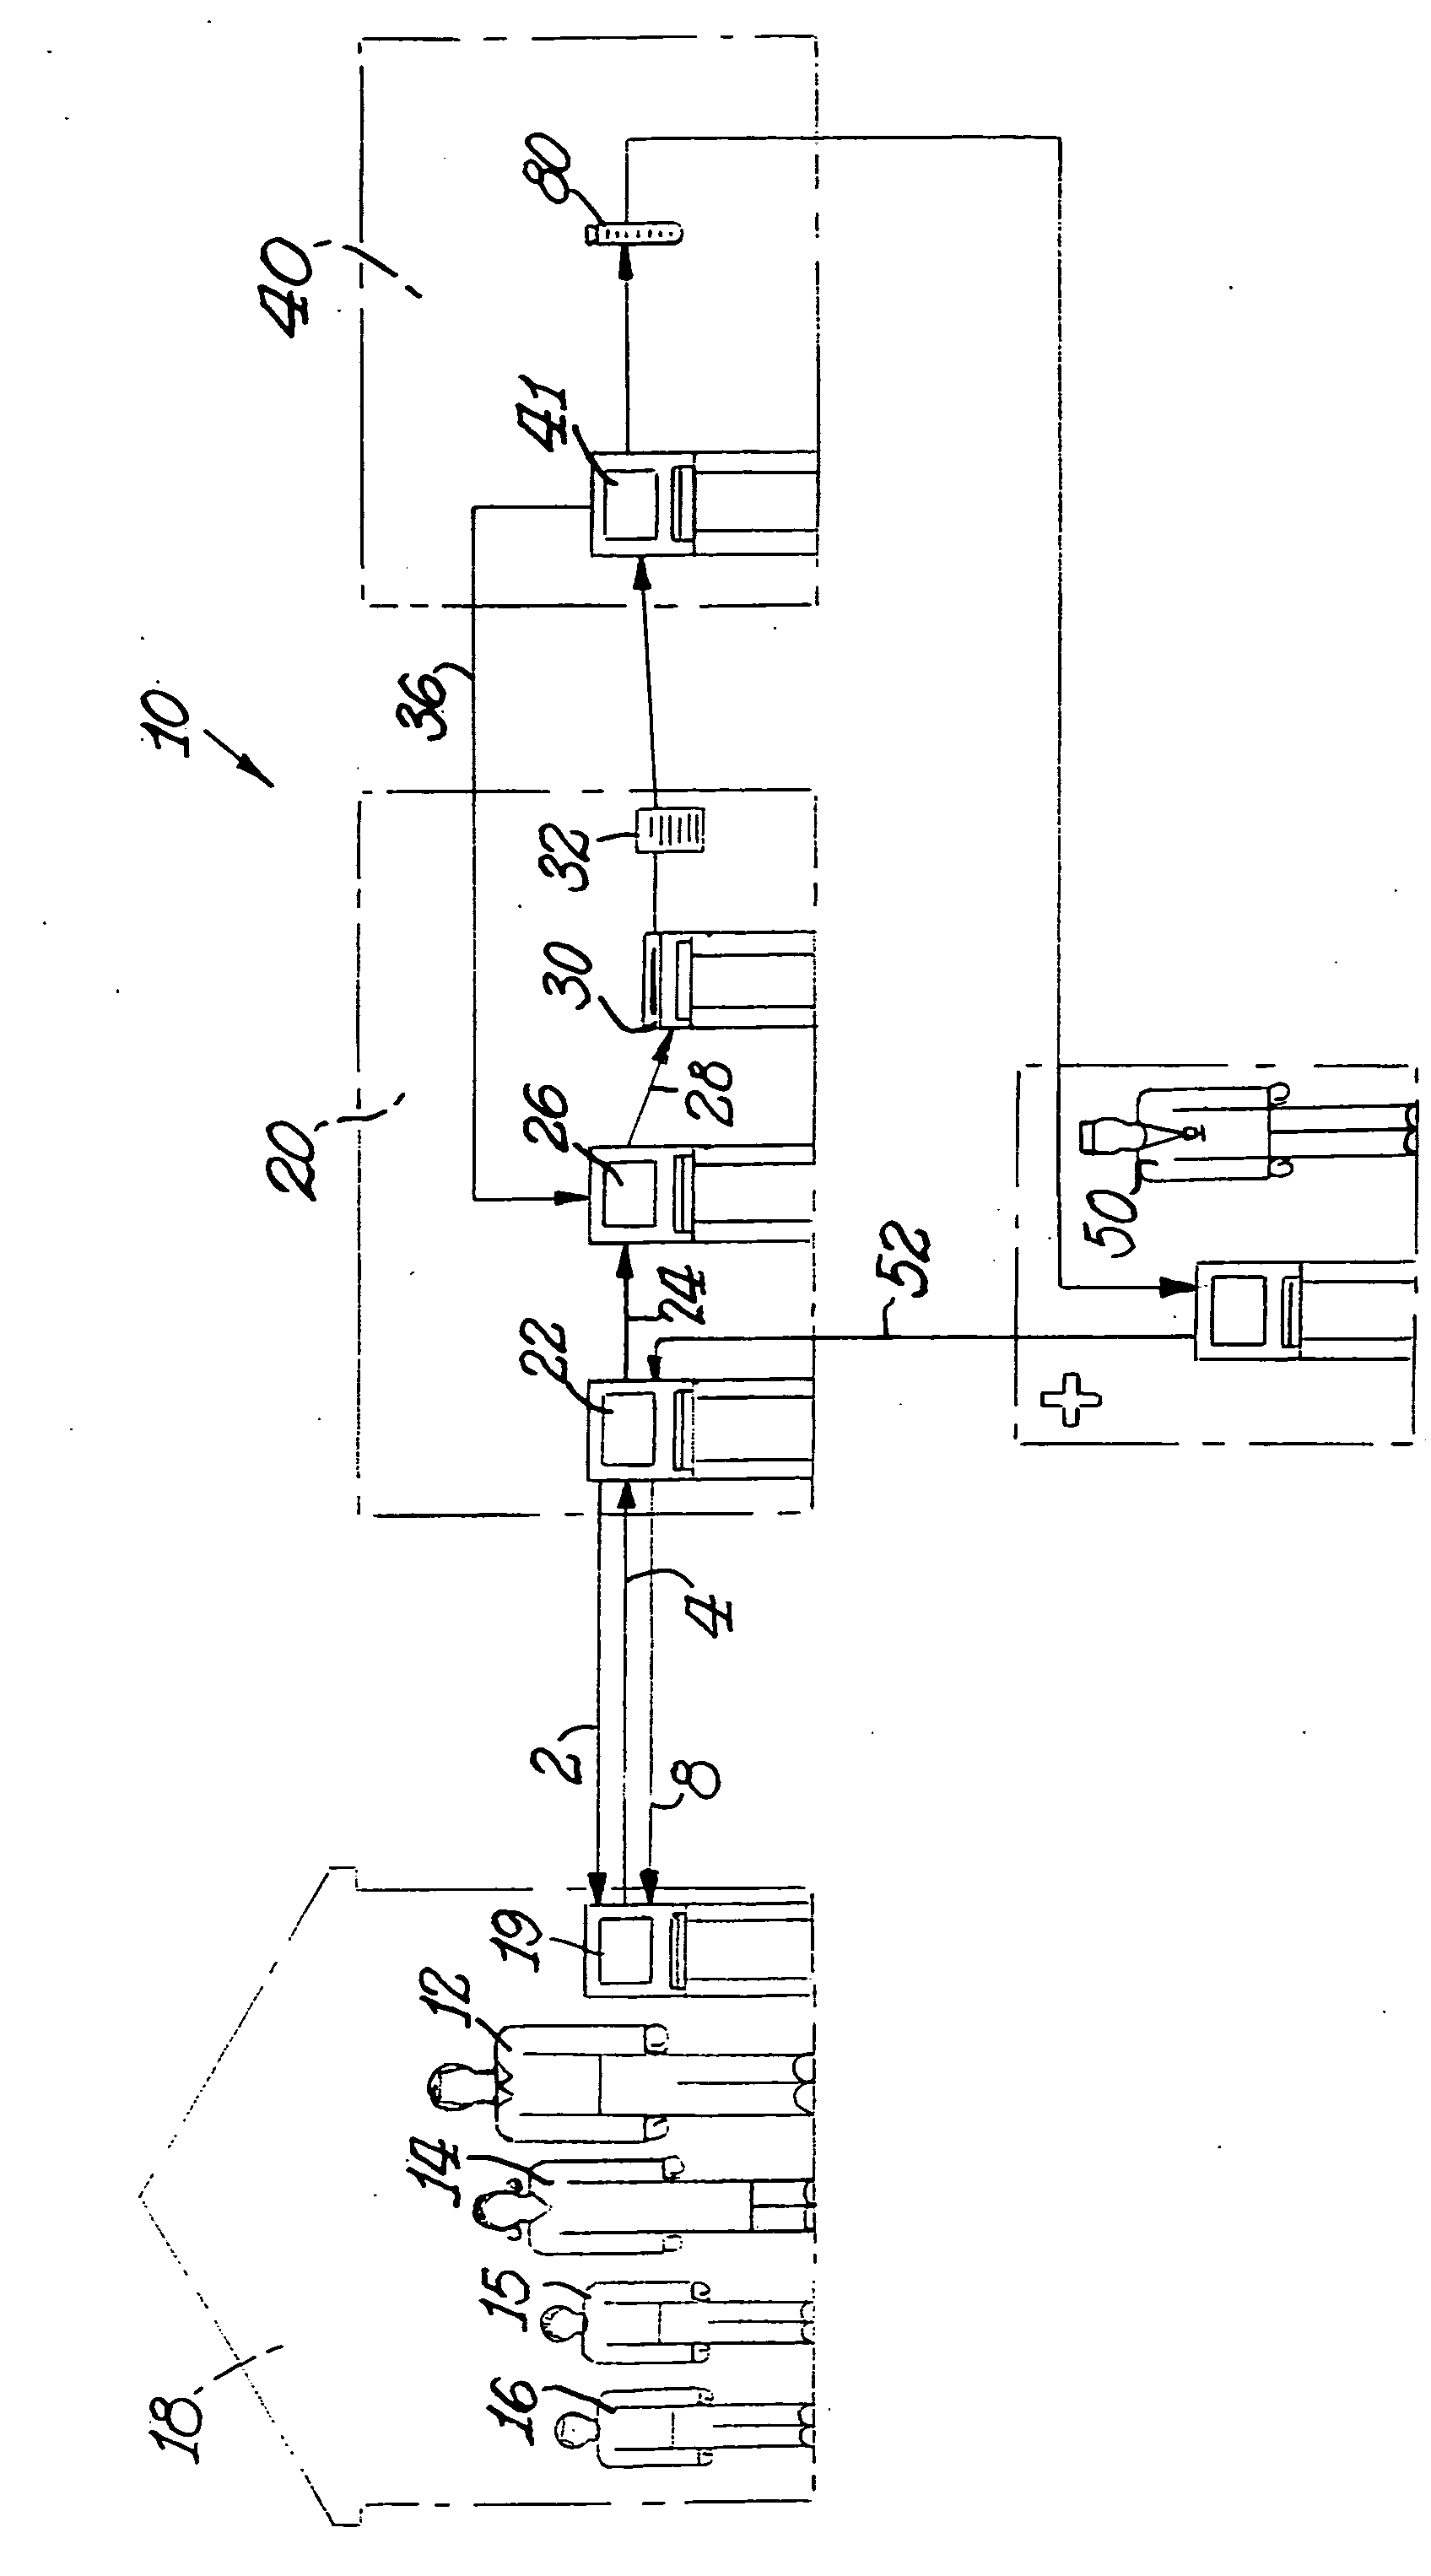 System and method for consumer/patient flushot reservation